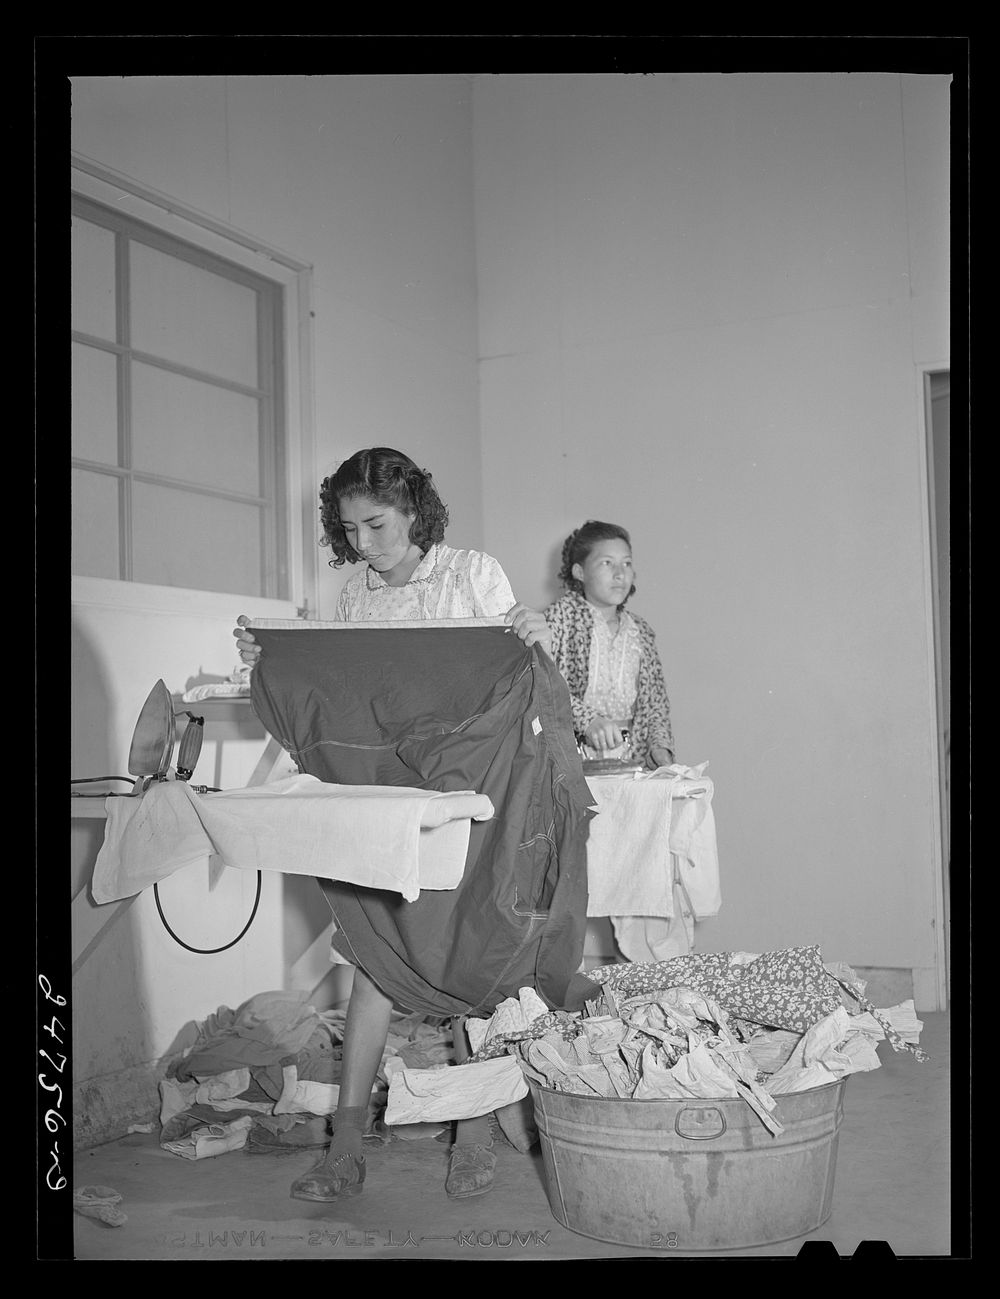 Ironing room, Robstown, Texas. FSA (Farm Security Administration) camp. Sourced from the Library of Congress.